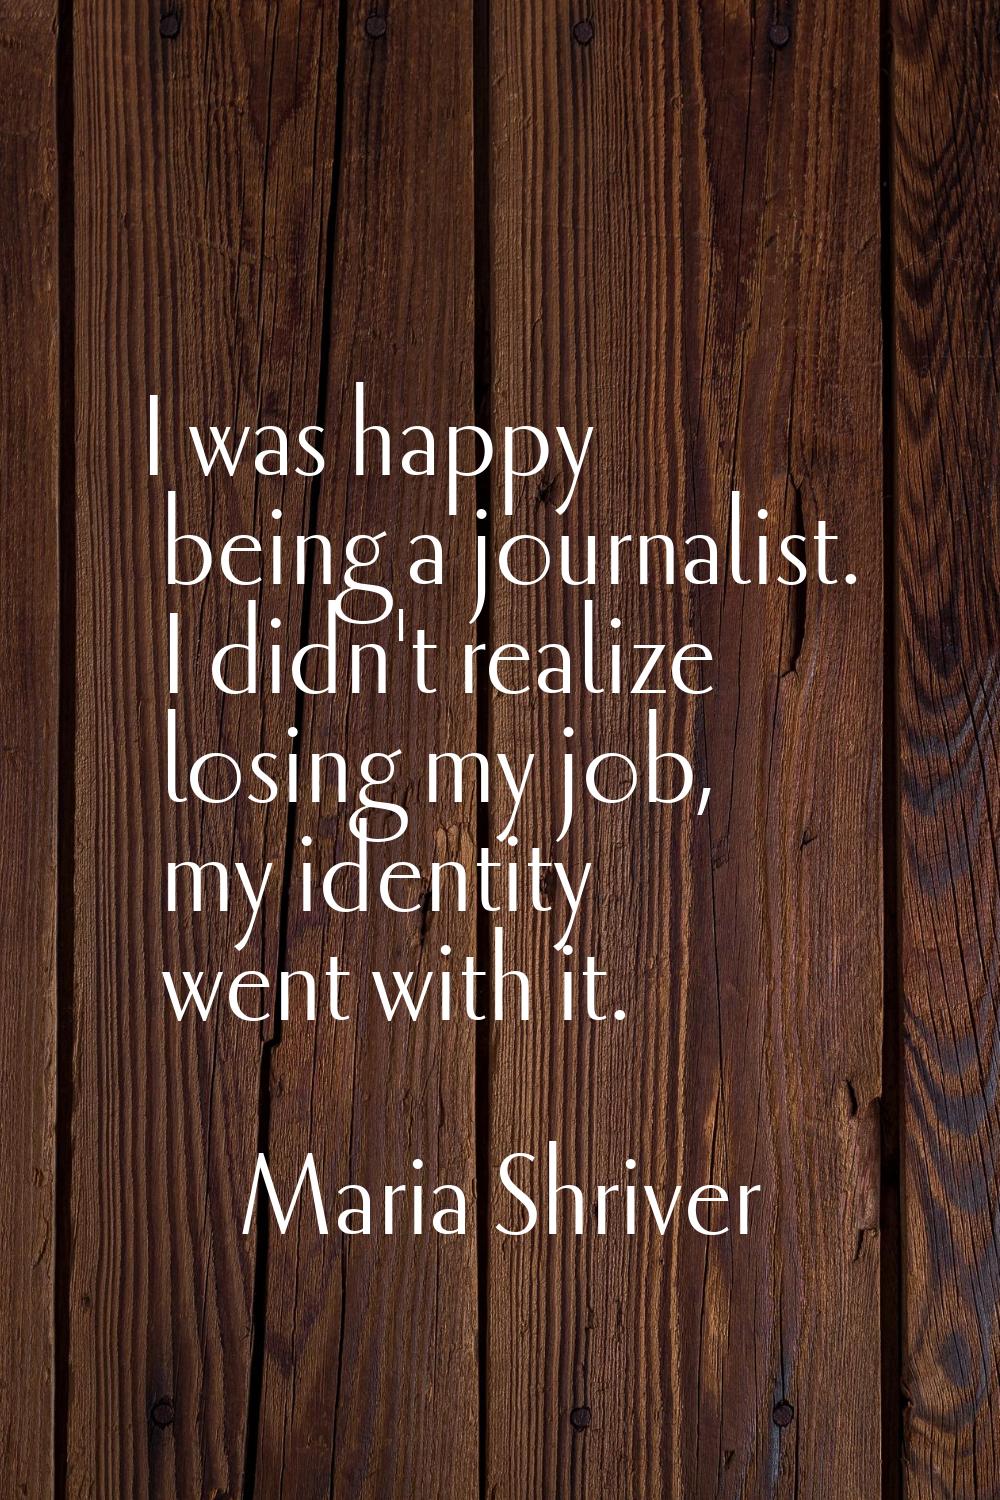 I was happy being a journalist. I didn't realize losing my job, my identity went with it.